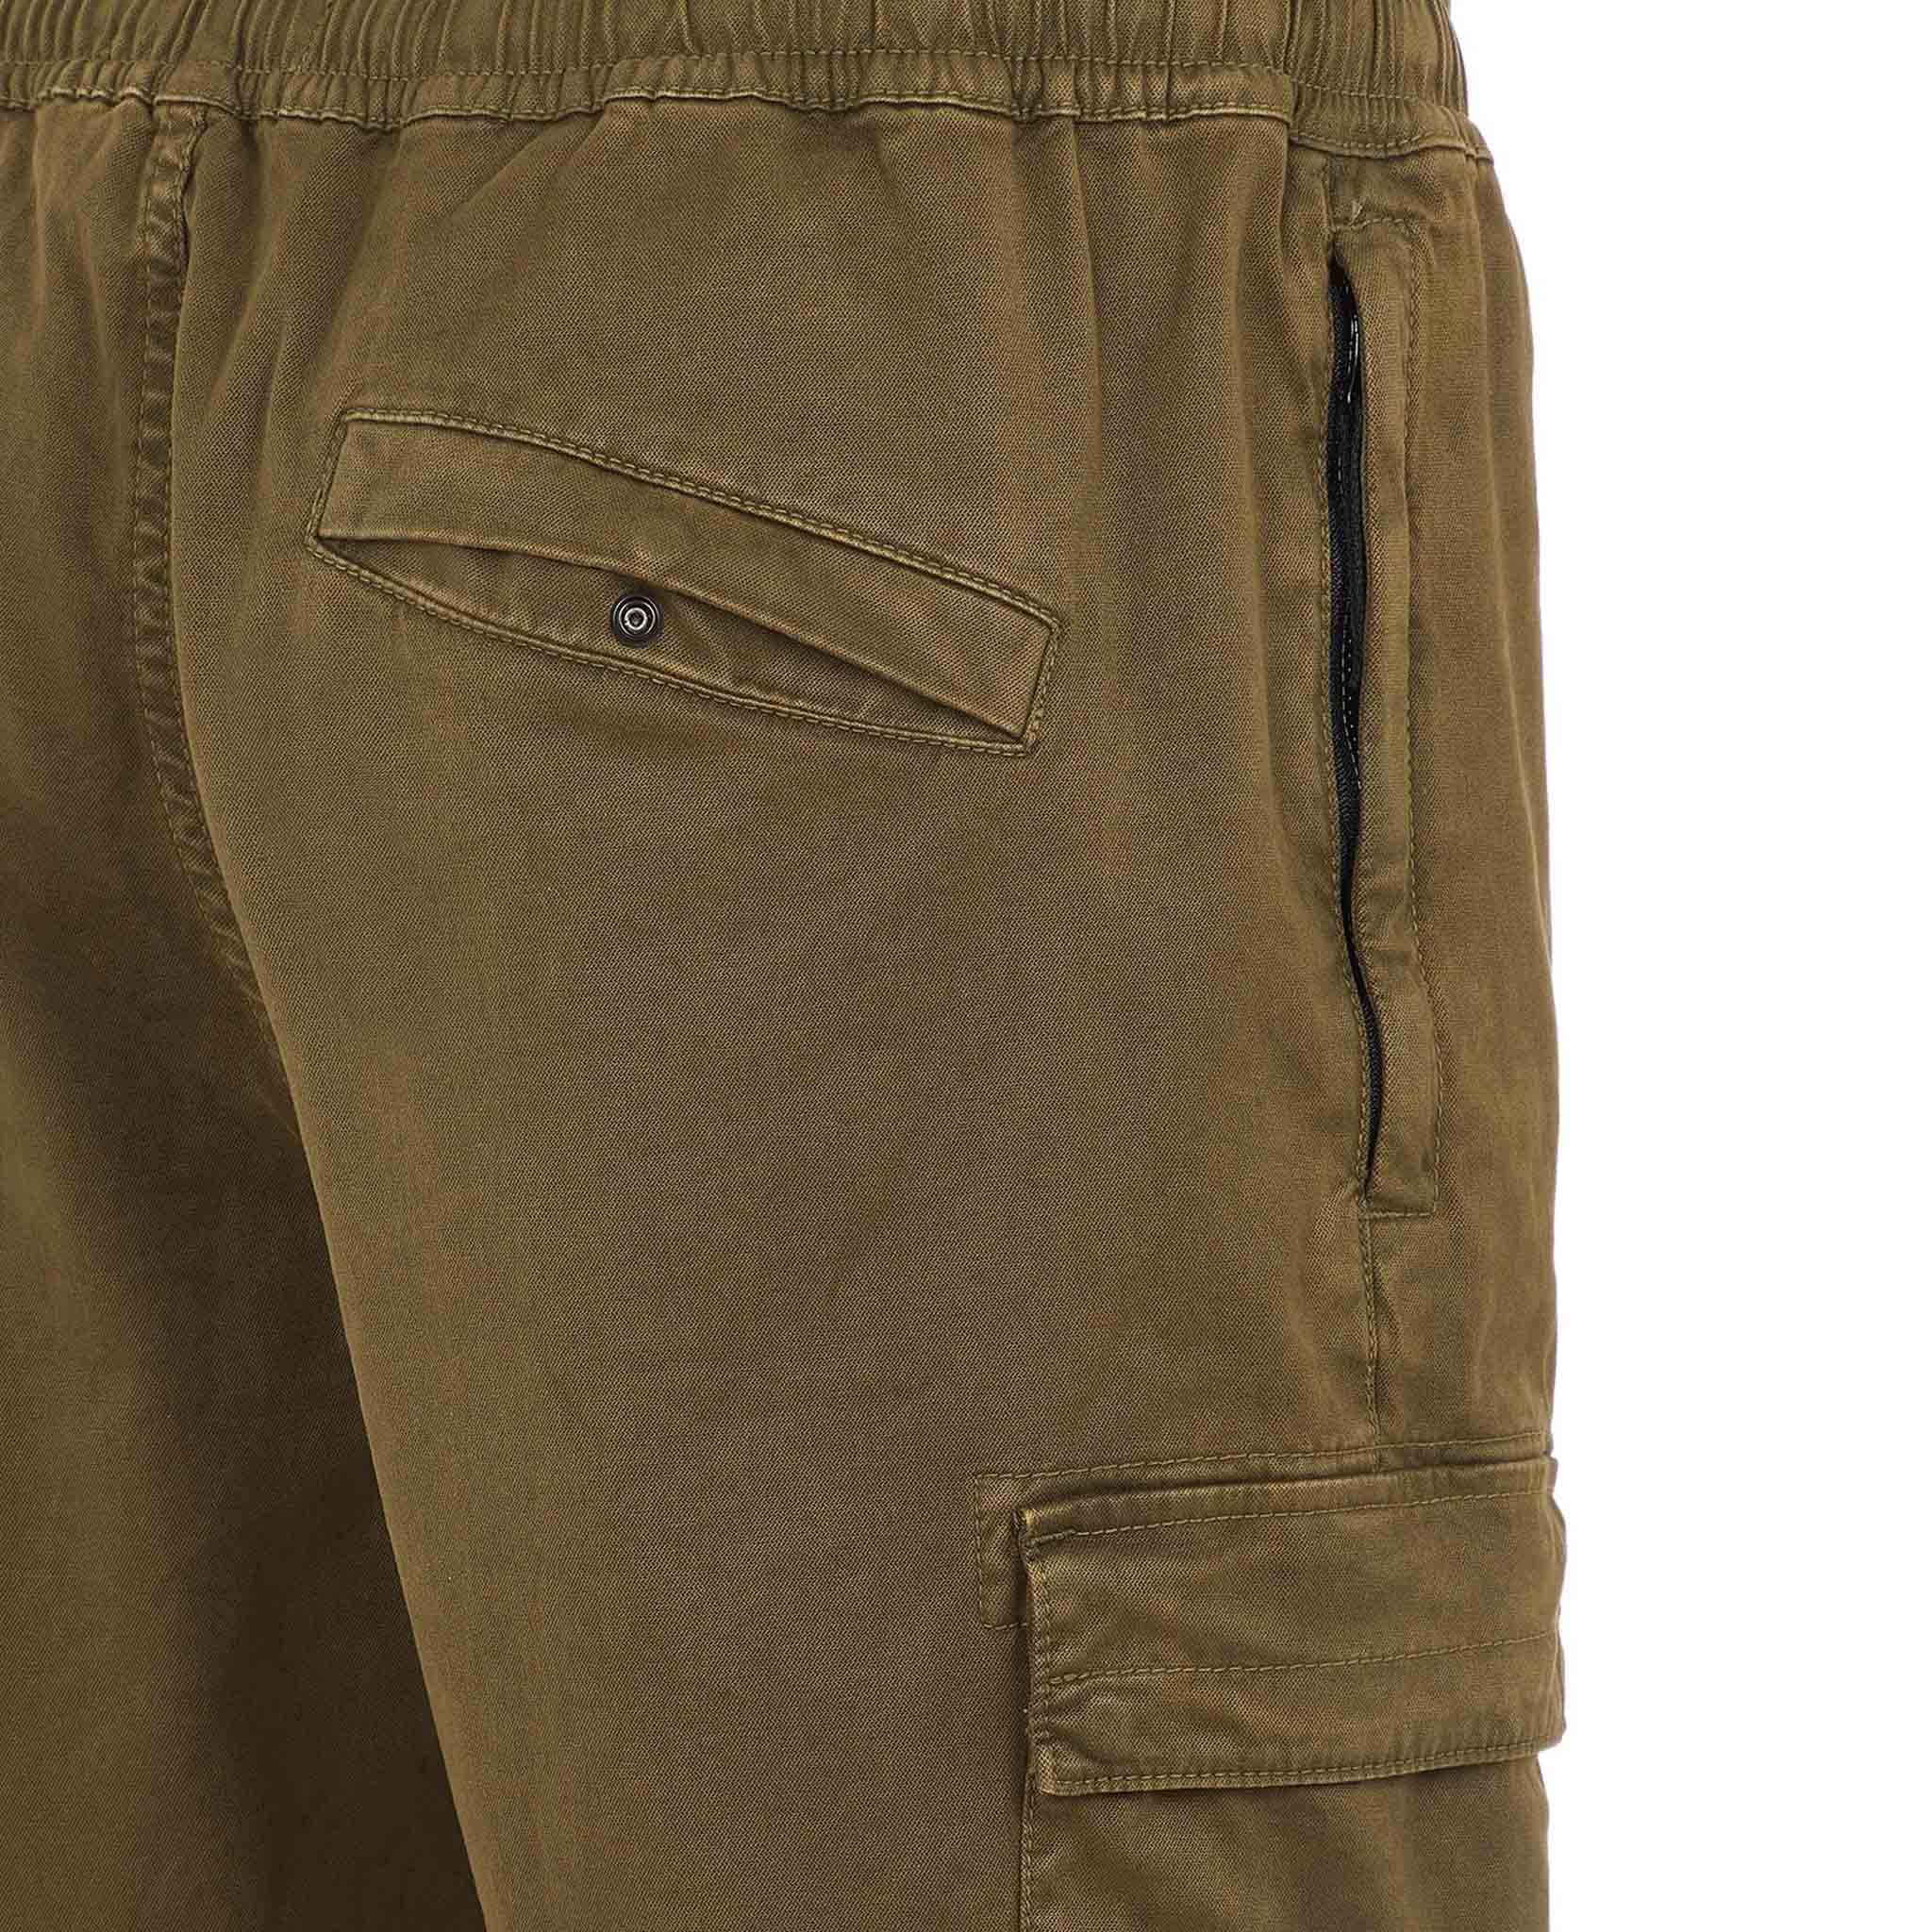 Stone Island Garment Dyed "Old" Treatment Cuffed Cargo Pants in Olive Green